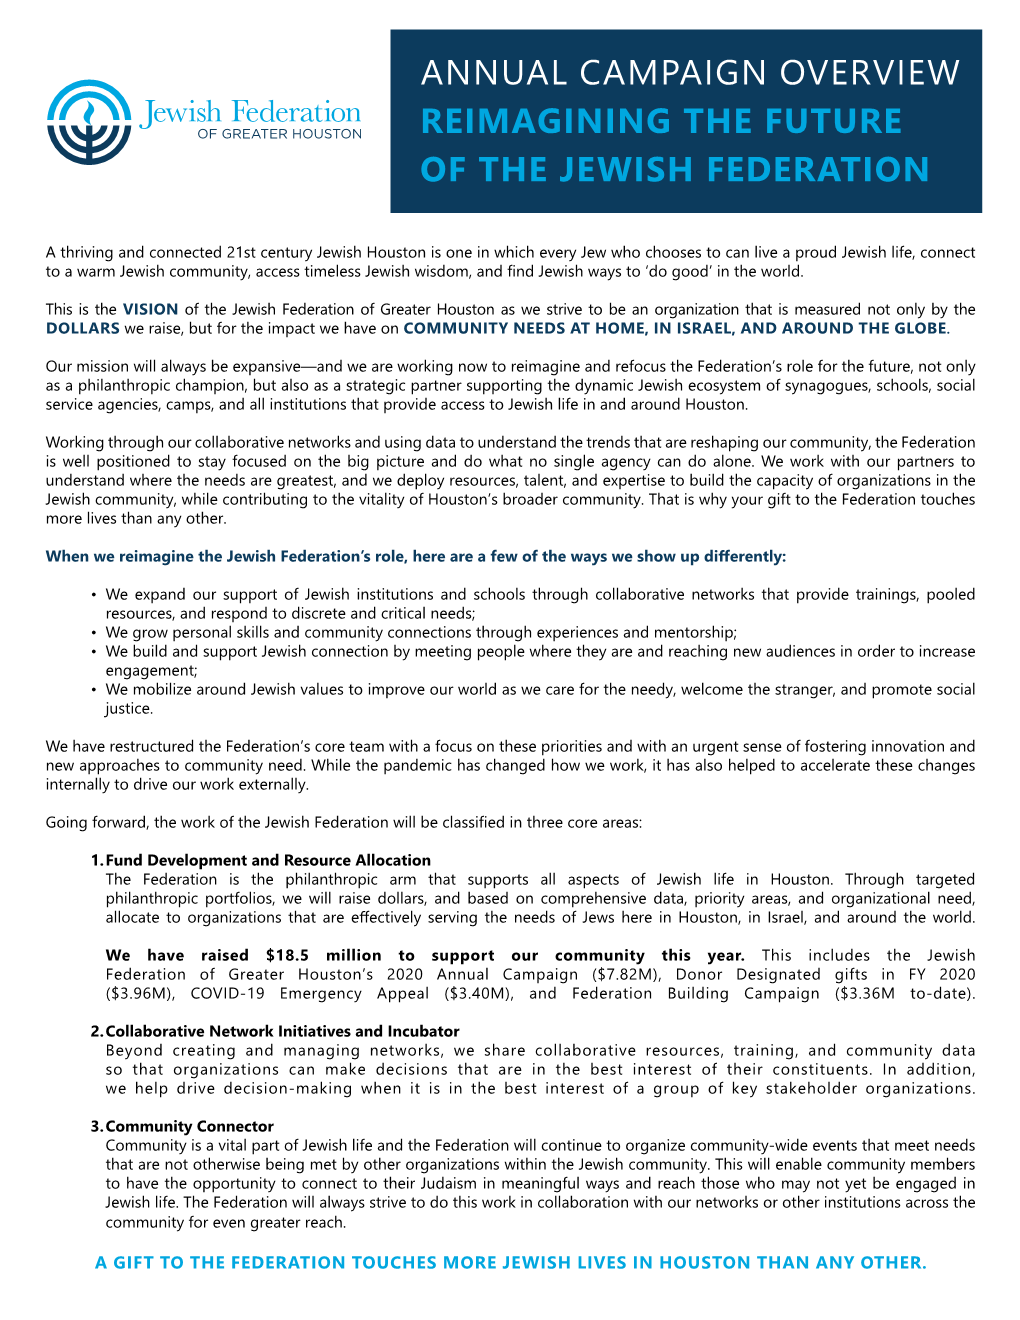 Annual Campaign Overview Reimagining the Future of the Jewish Federation